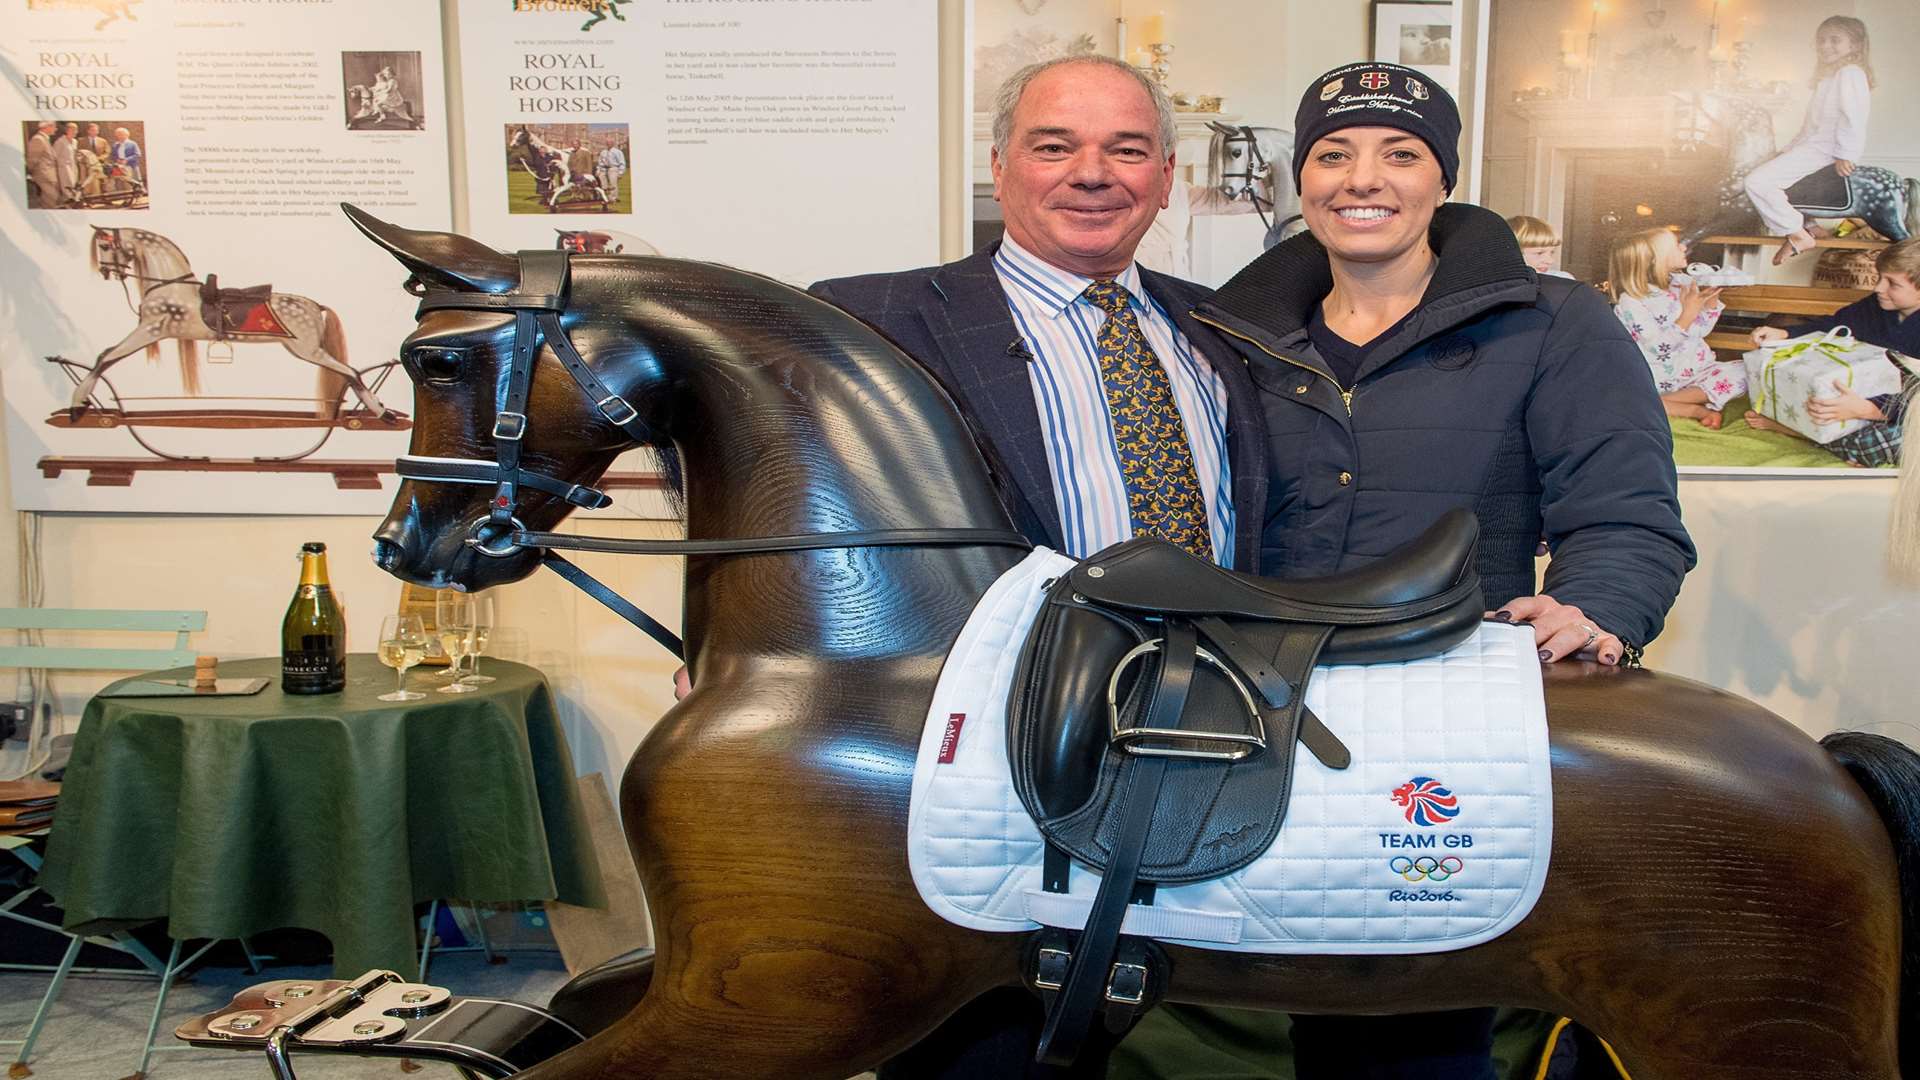 Olympic dressage rider Charlotte Dujardin and Marc Stevenson with the rocking horse